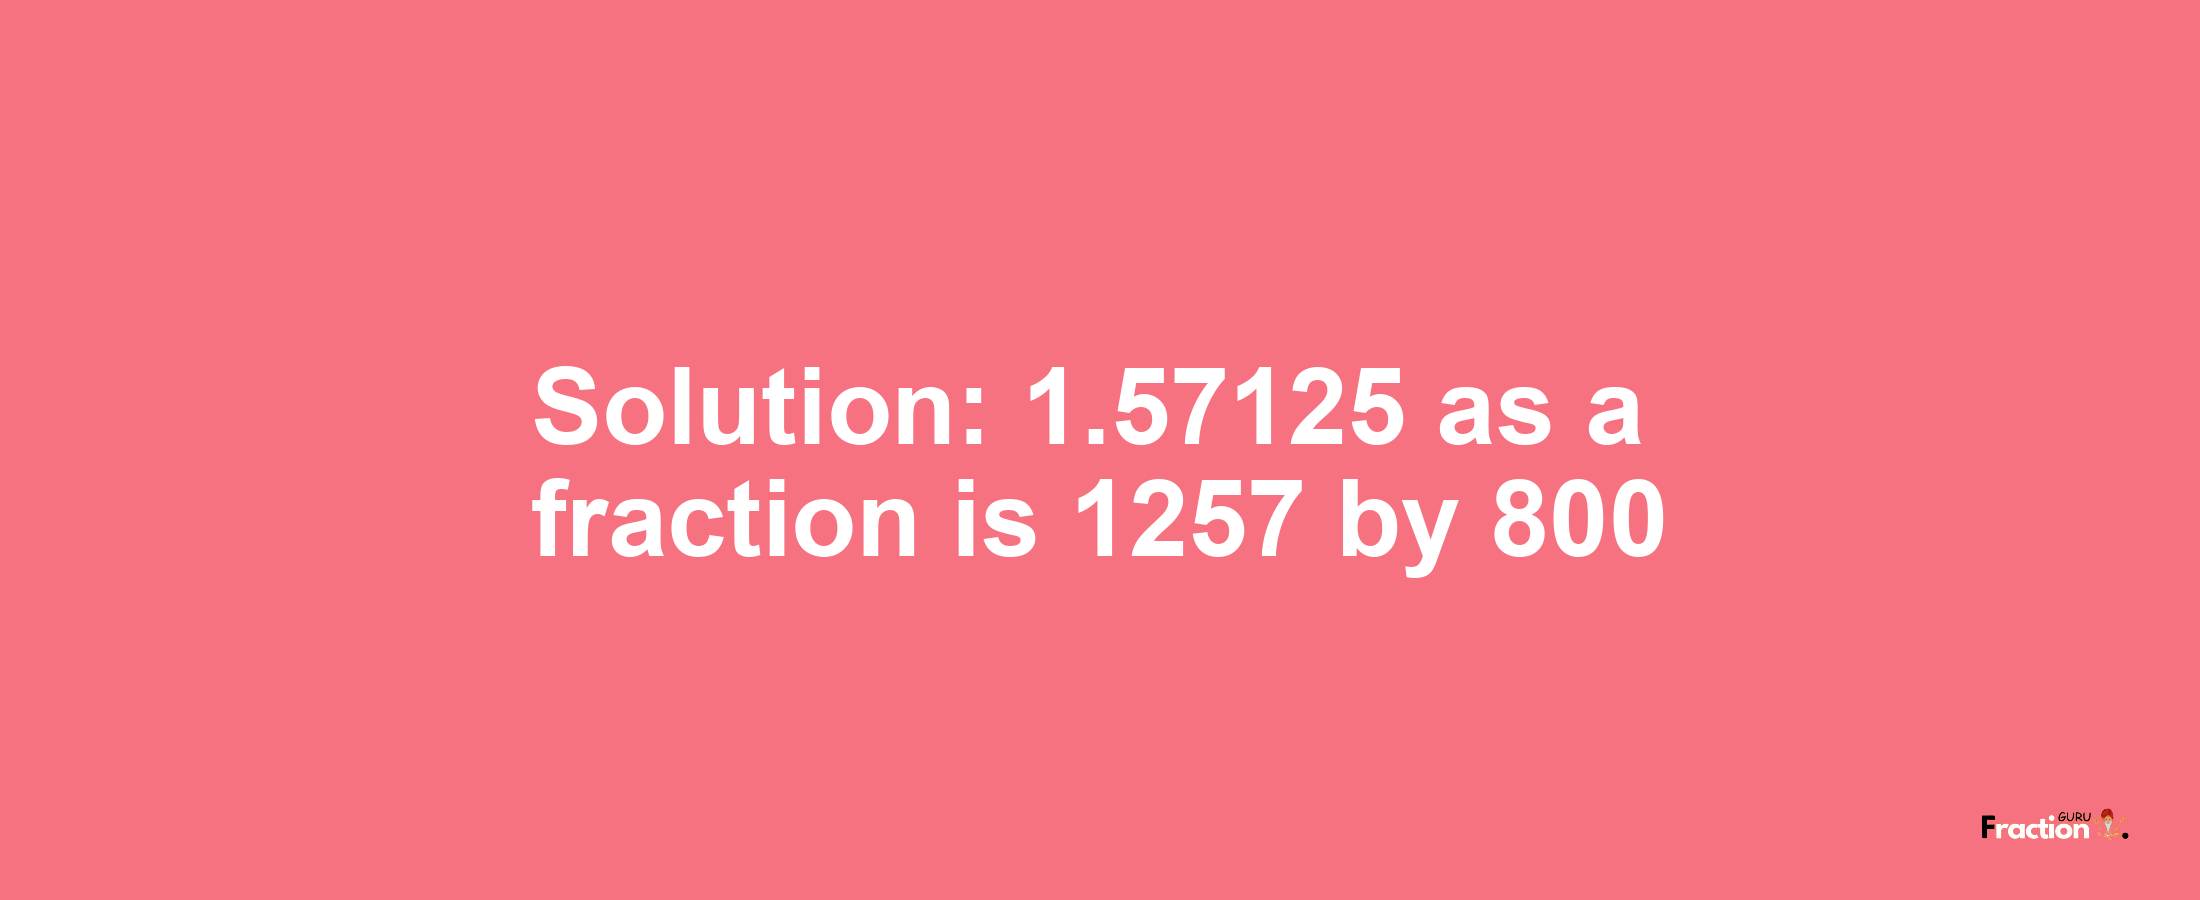 Solution:1.57125 as a fraction is 1257/800